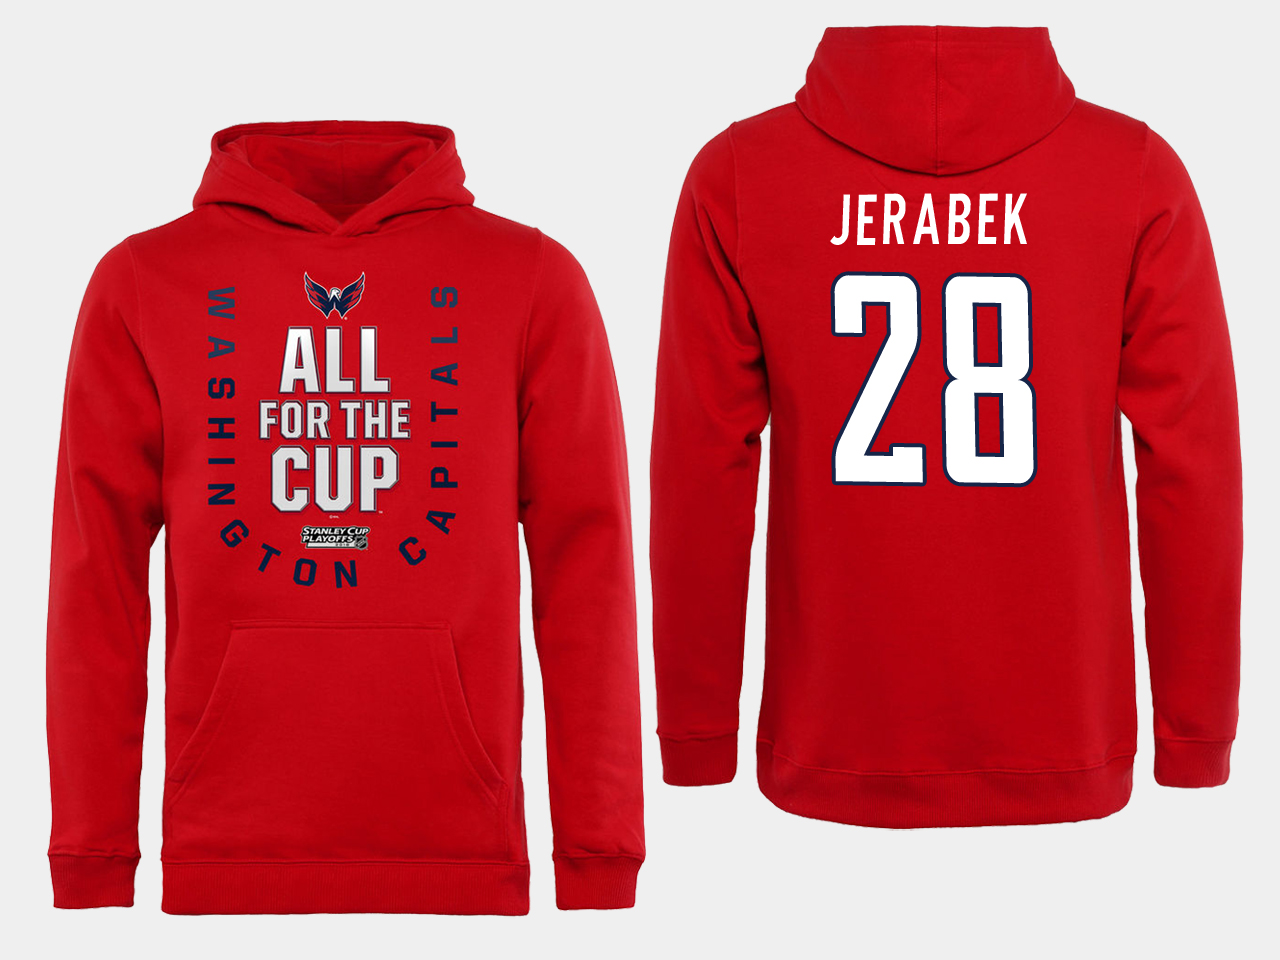 Men NHL Washington Capitals #28 Jerabek Red All for the Cup Hoodie